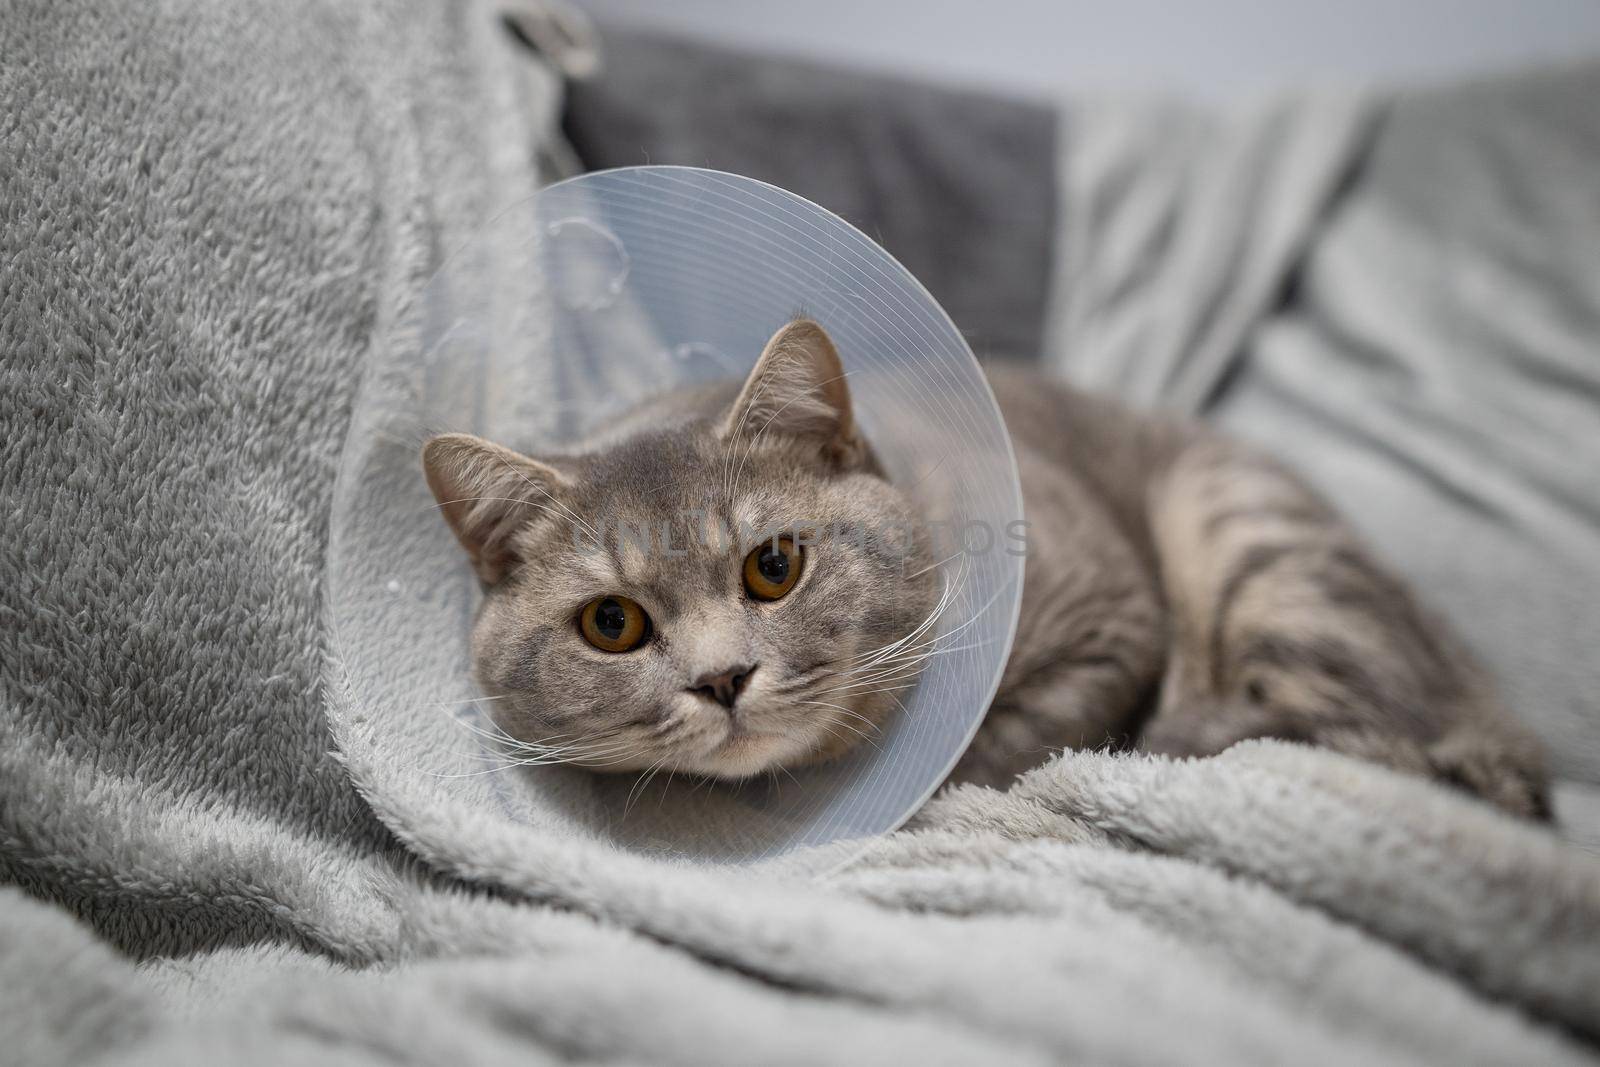 Sick gray Scottish Straight breed cat wearing pet medical collar cone Elizabethan collar to avoid licking at house. British cat after surgery at home on couch wearing protective plastic cone on head by Tomashevska